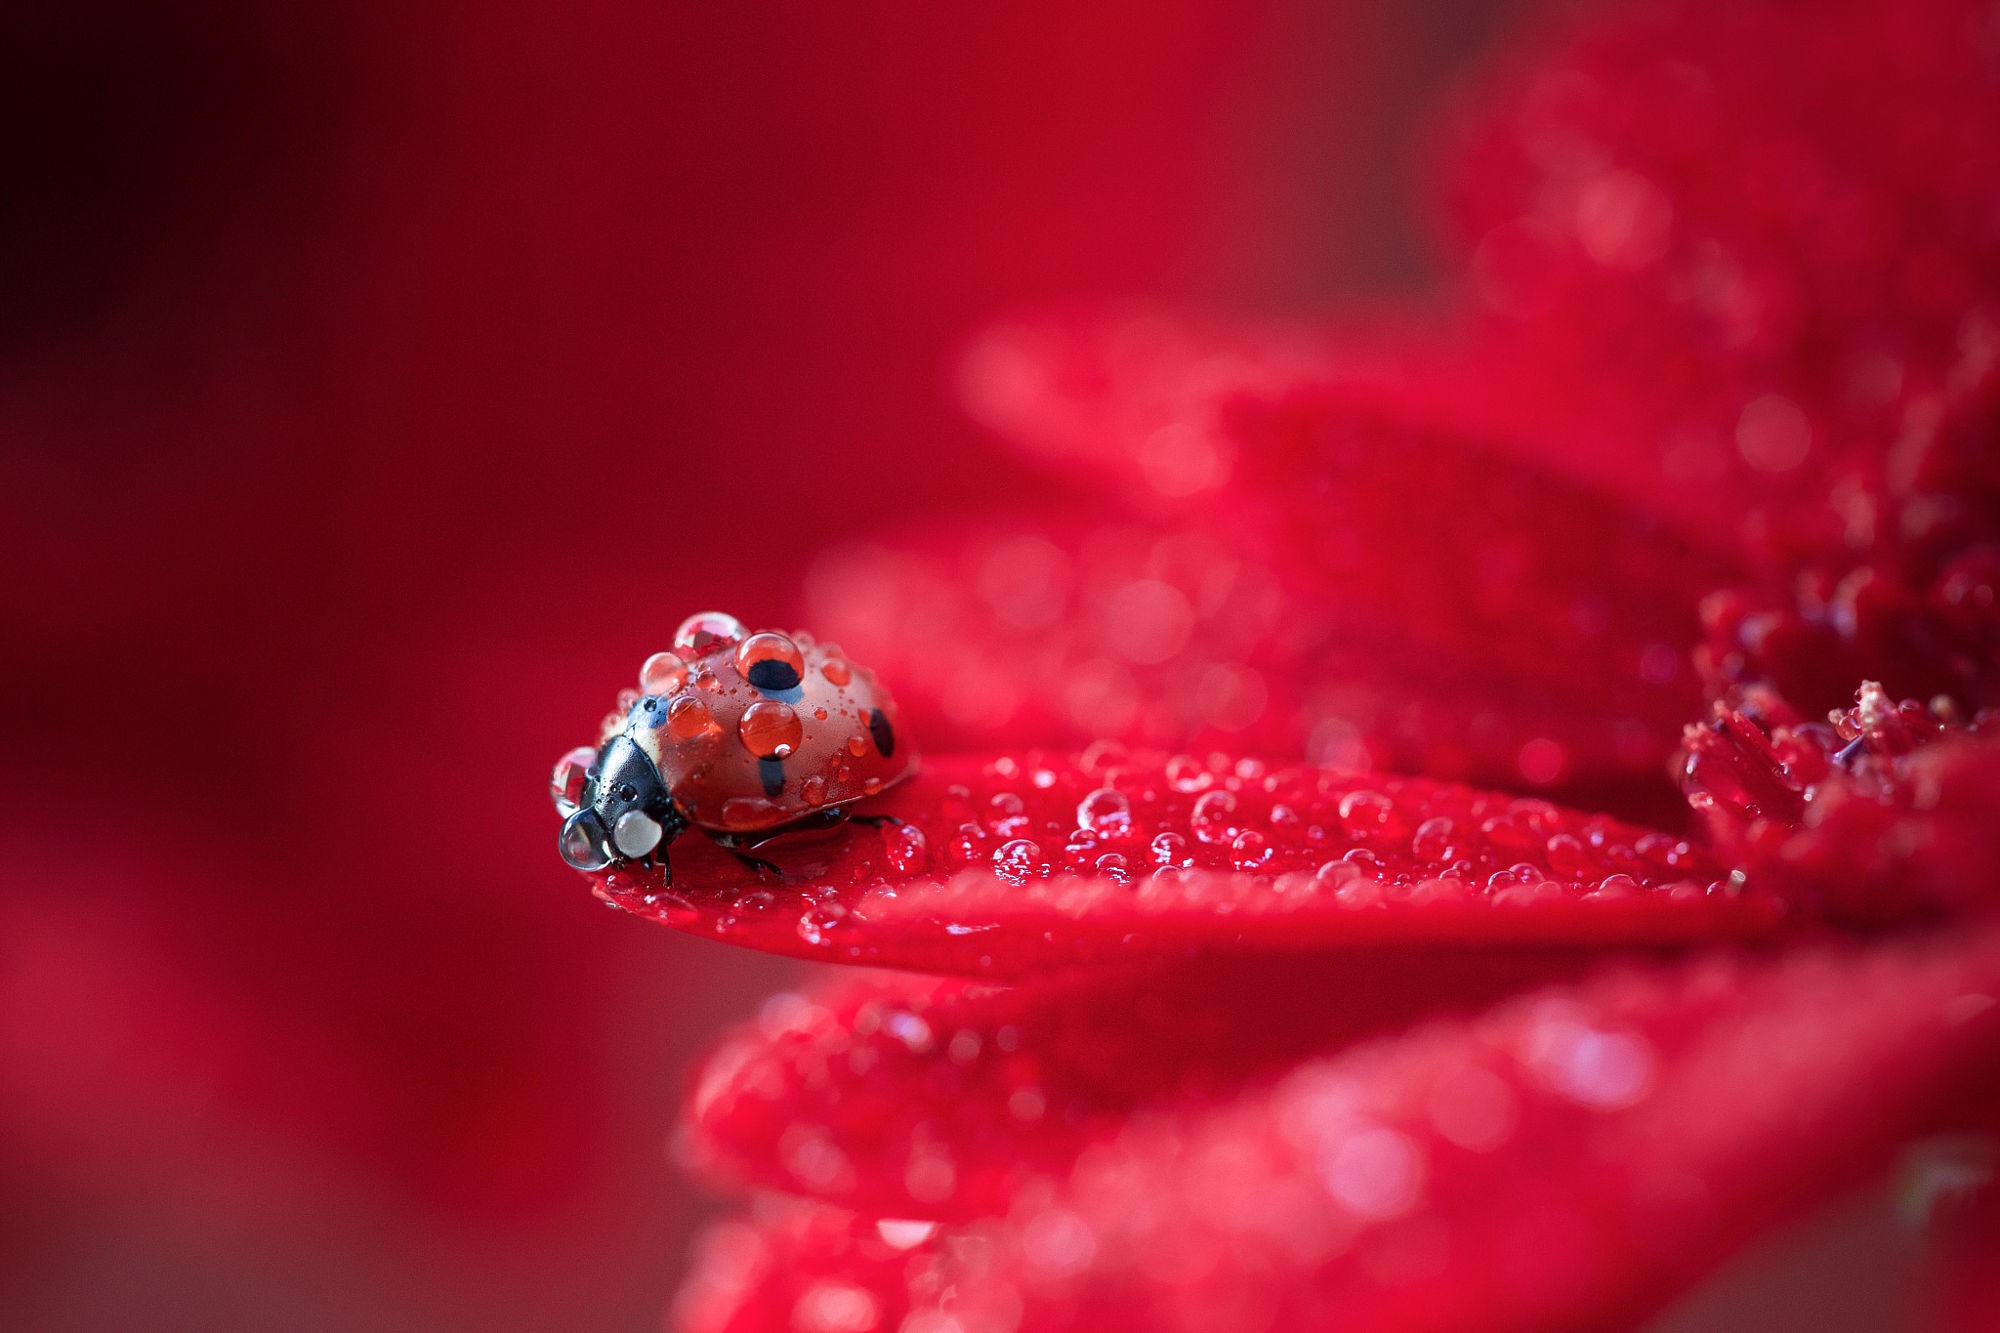 General 2000x1333 ladybugs macro animals insect water drops nature red vibrant red background